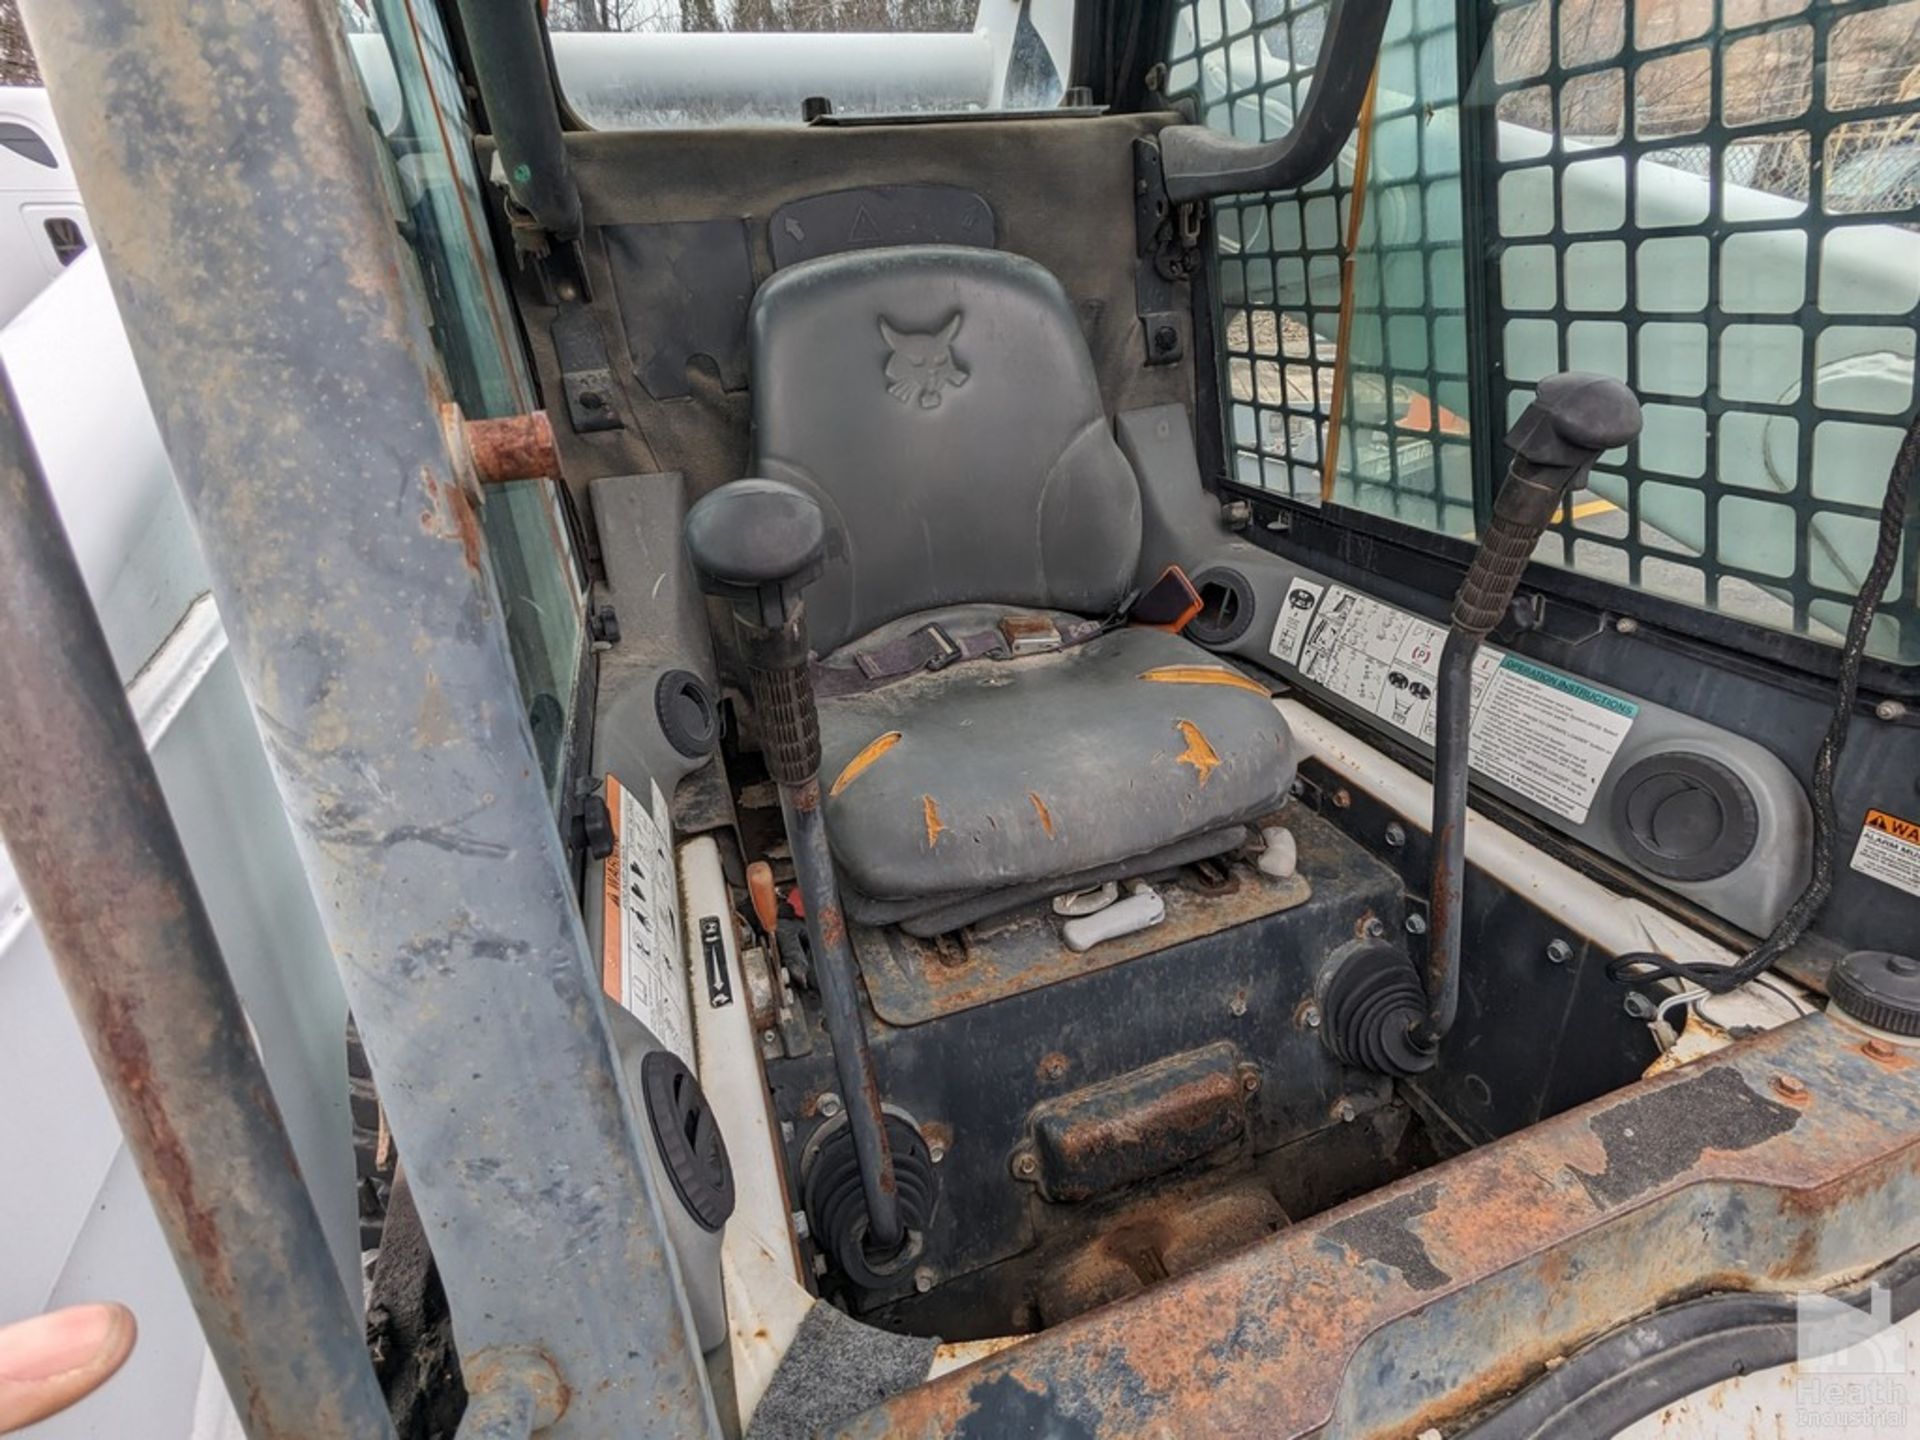 BOBCAT MODEL S250 SKID STEER LOADER, PIN 521316469, AUX HYDRAULICS, 2353 HOURS SHOWN ON METER - Image 7 of 10